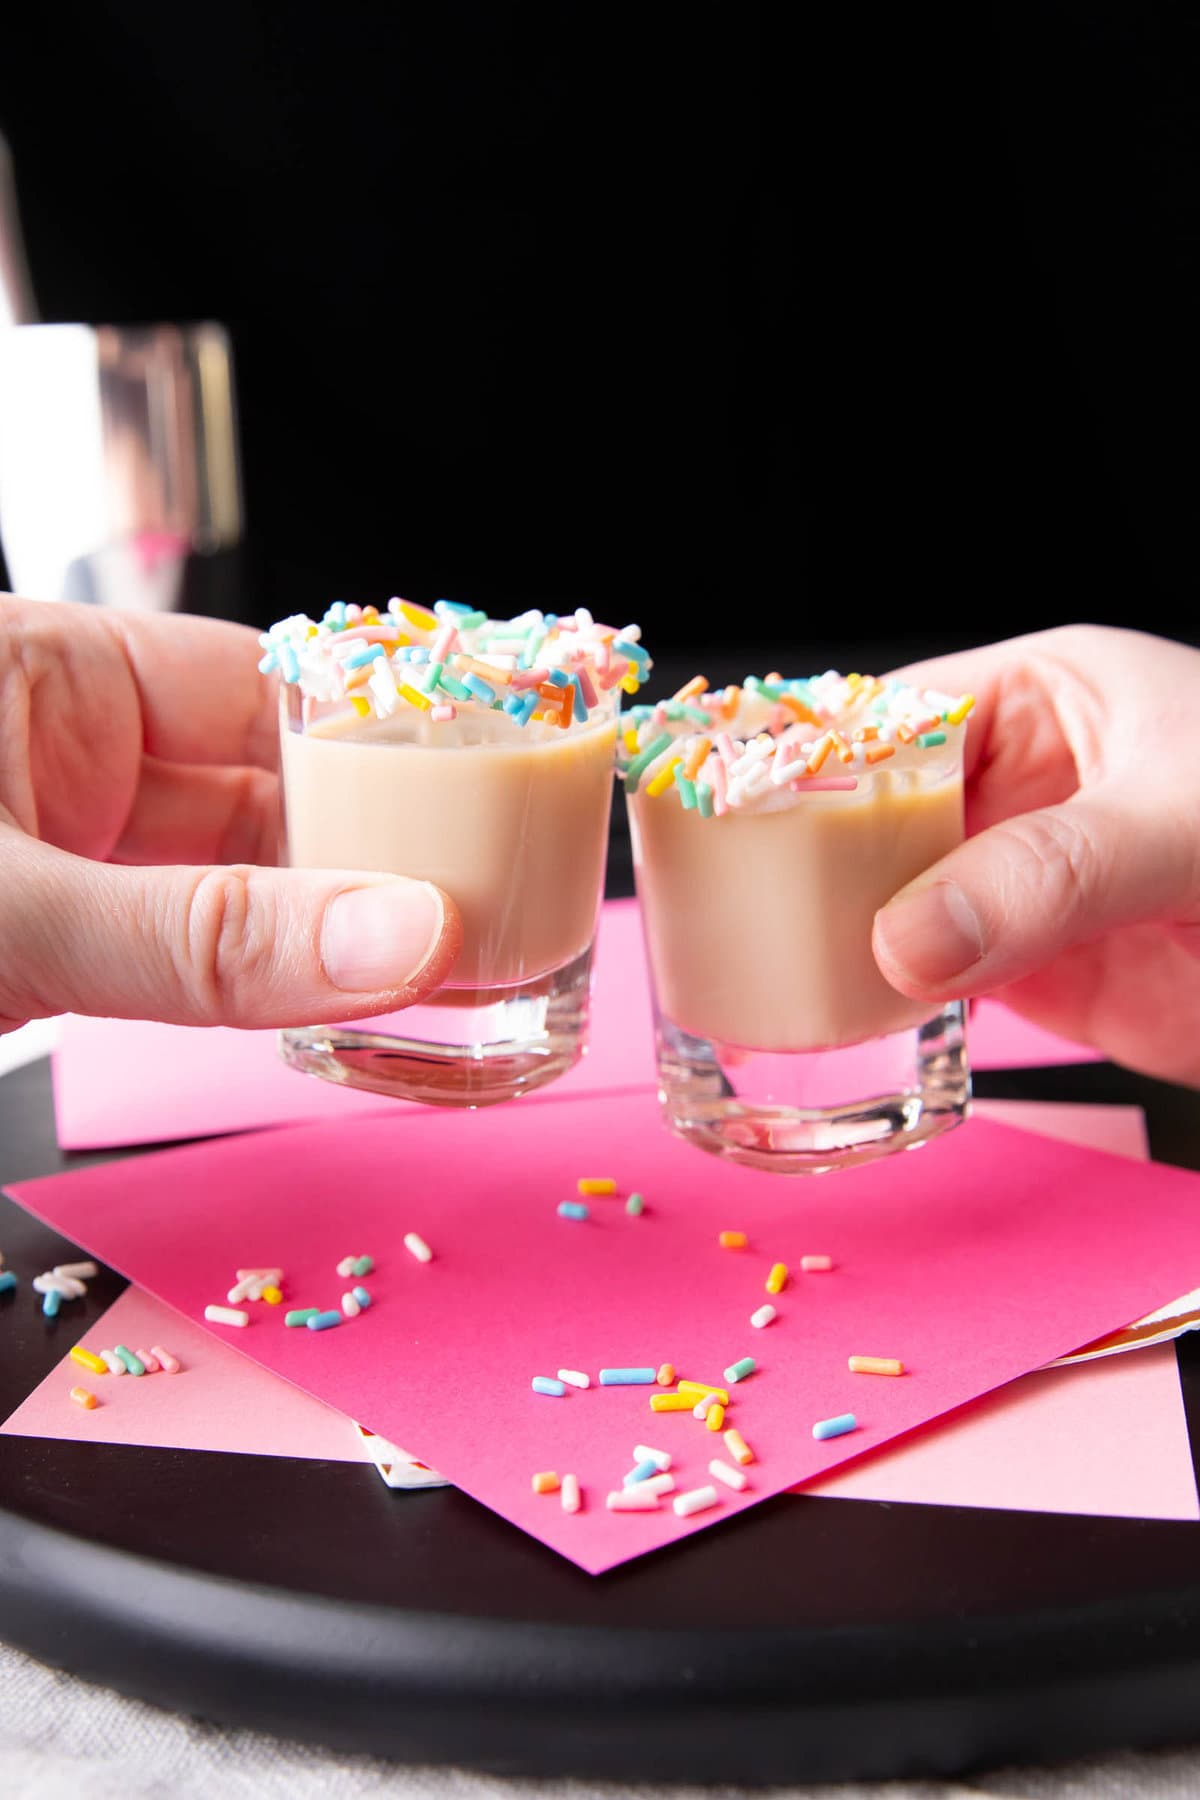 Two hands holding birthday cake shots, clinking shot glasses